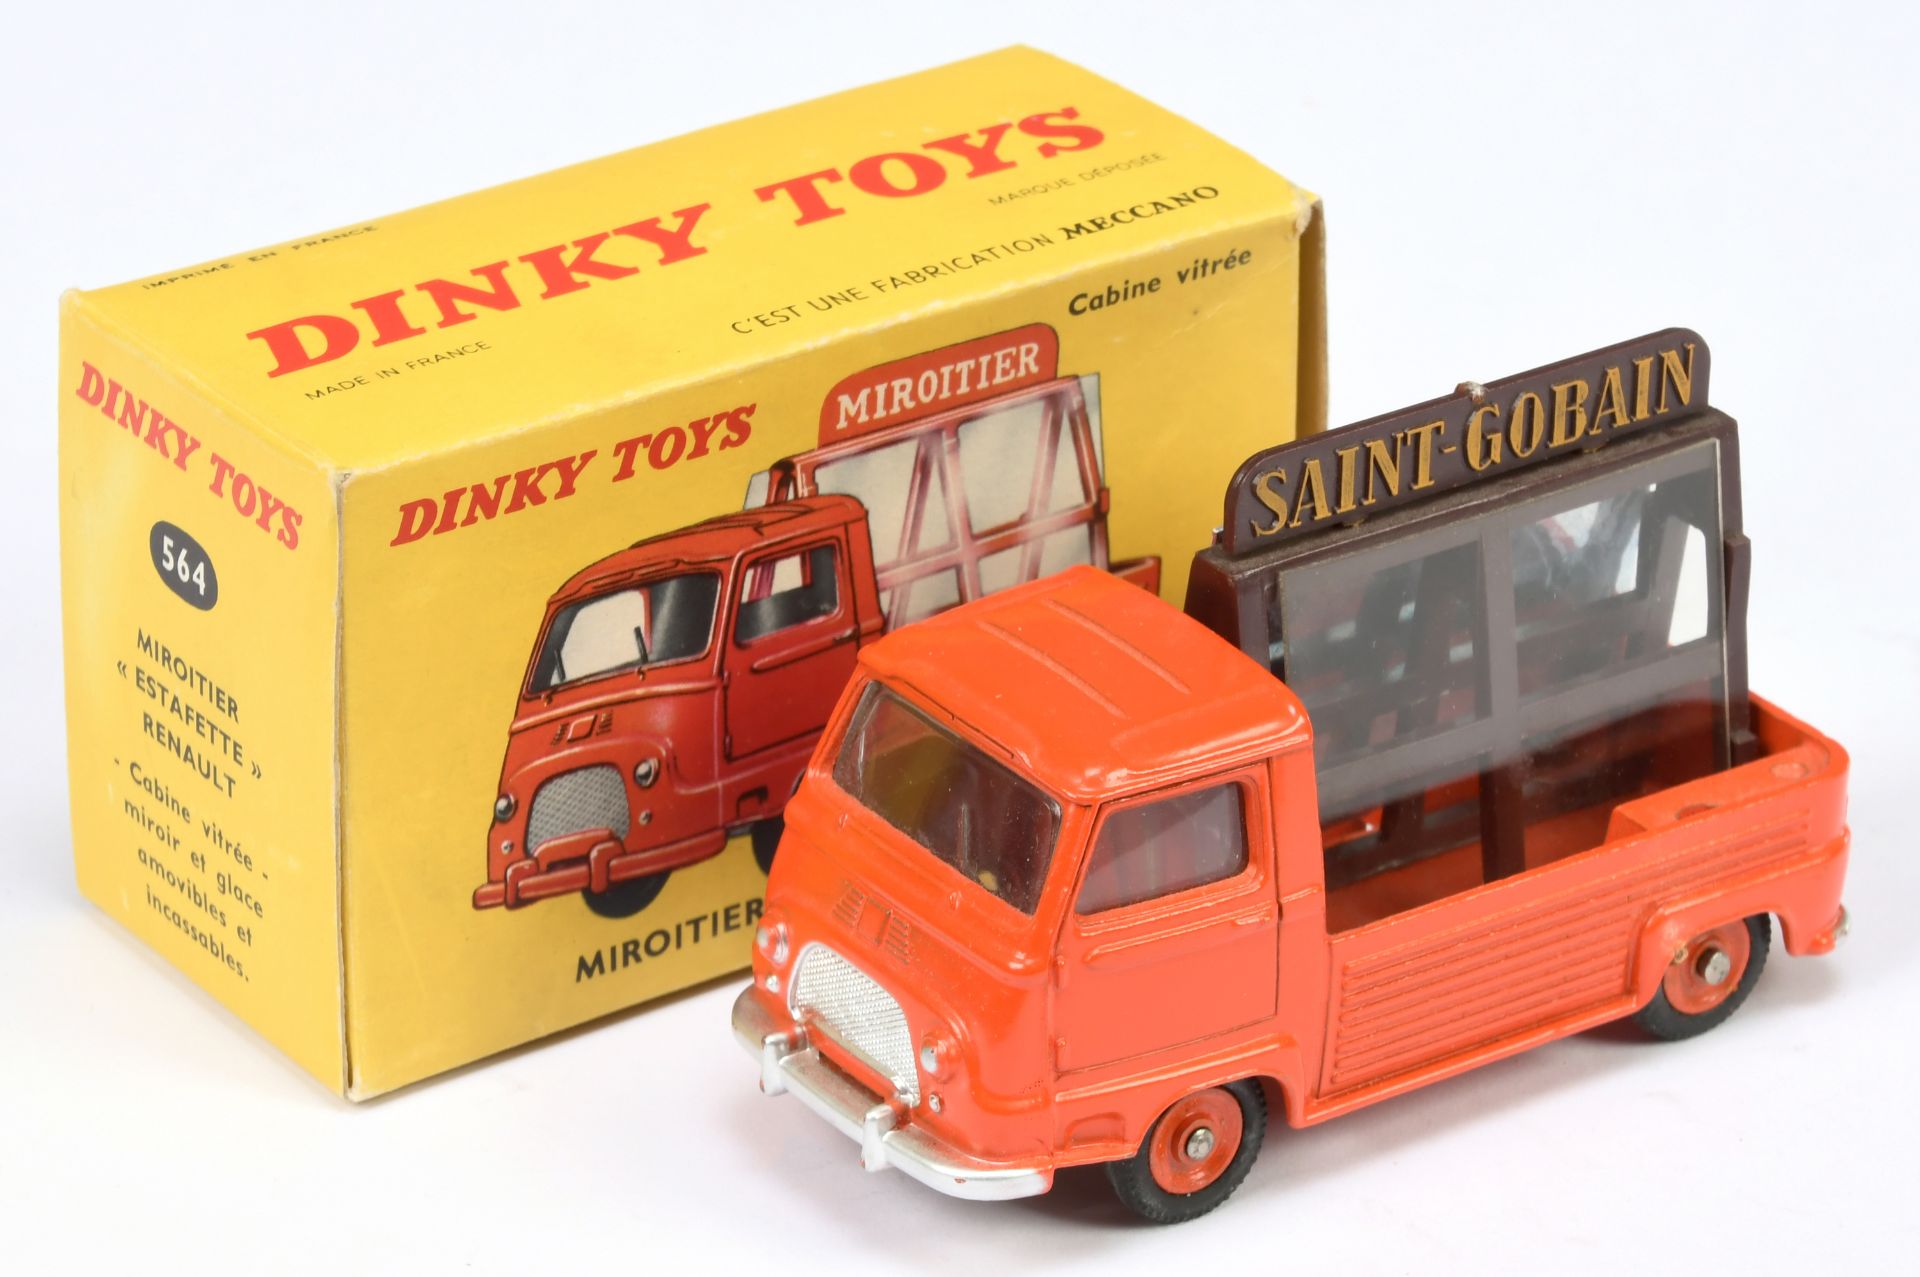 French Dinky Toys 564 Renault Estafette Pick-Up "Saint-Gobain/Miroitier" - Orange cab, back and c...